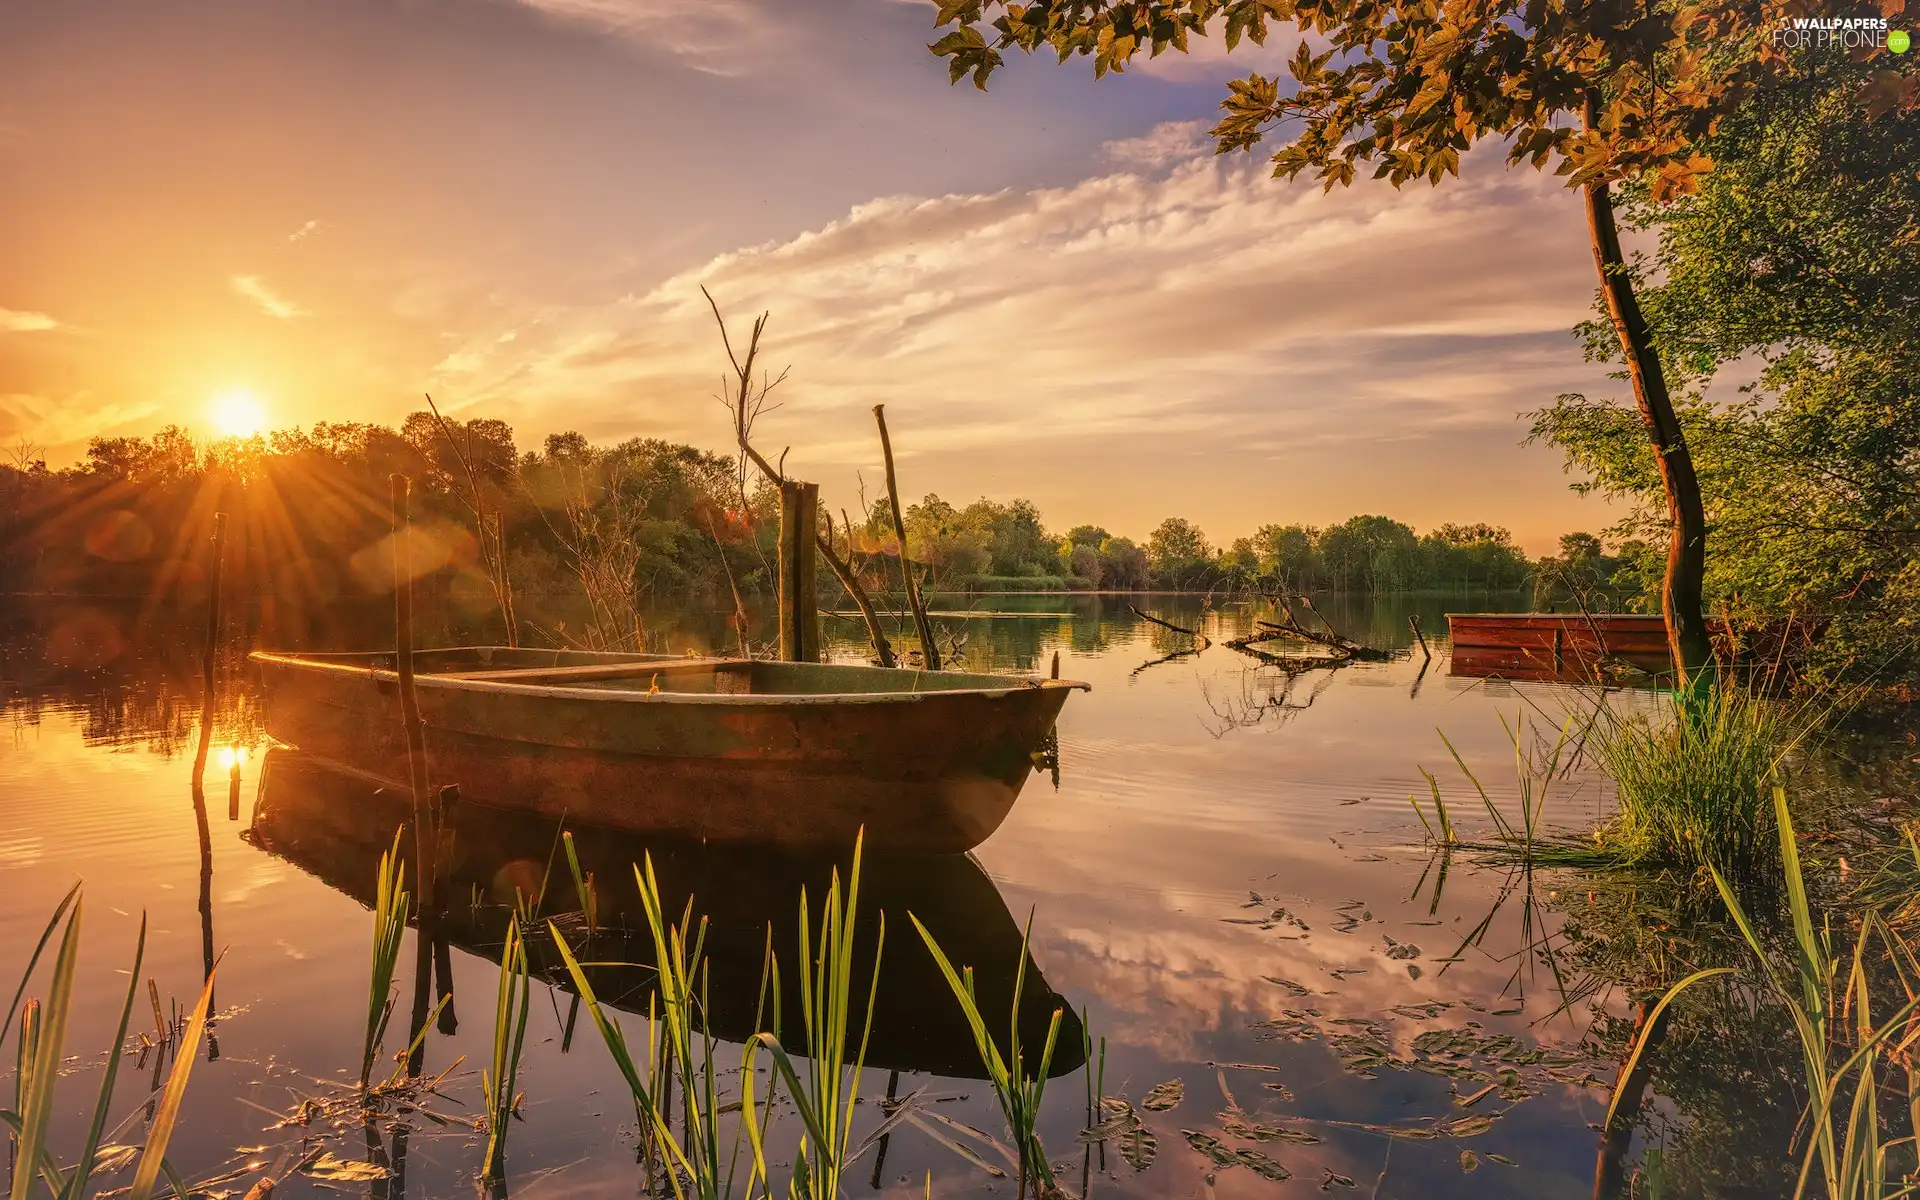 Boat, Great Sunsets, viewes, rushes, trees, lake